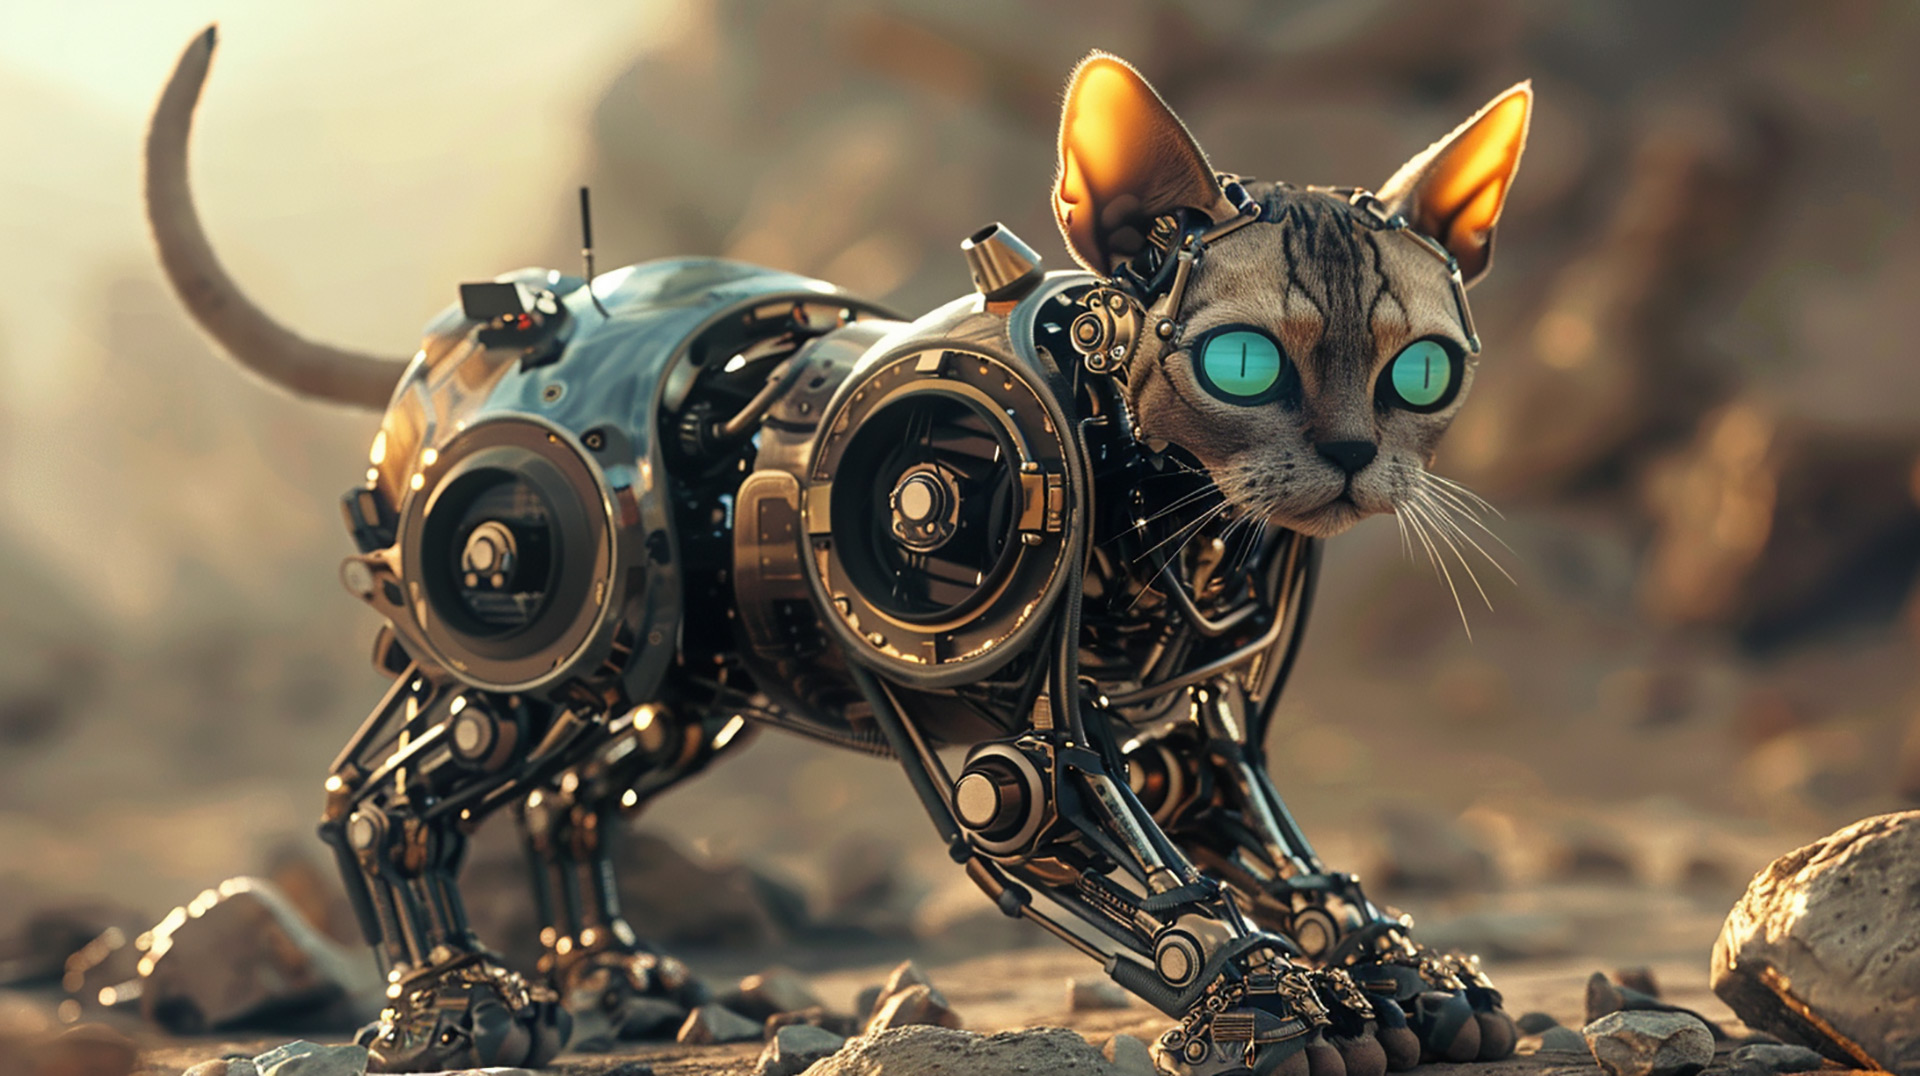 High-Tech Cyborg Cat Wallpapers in Ultra HD Quality